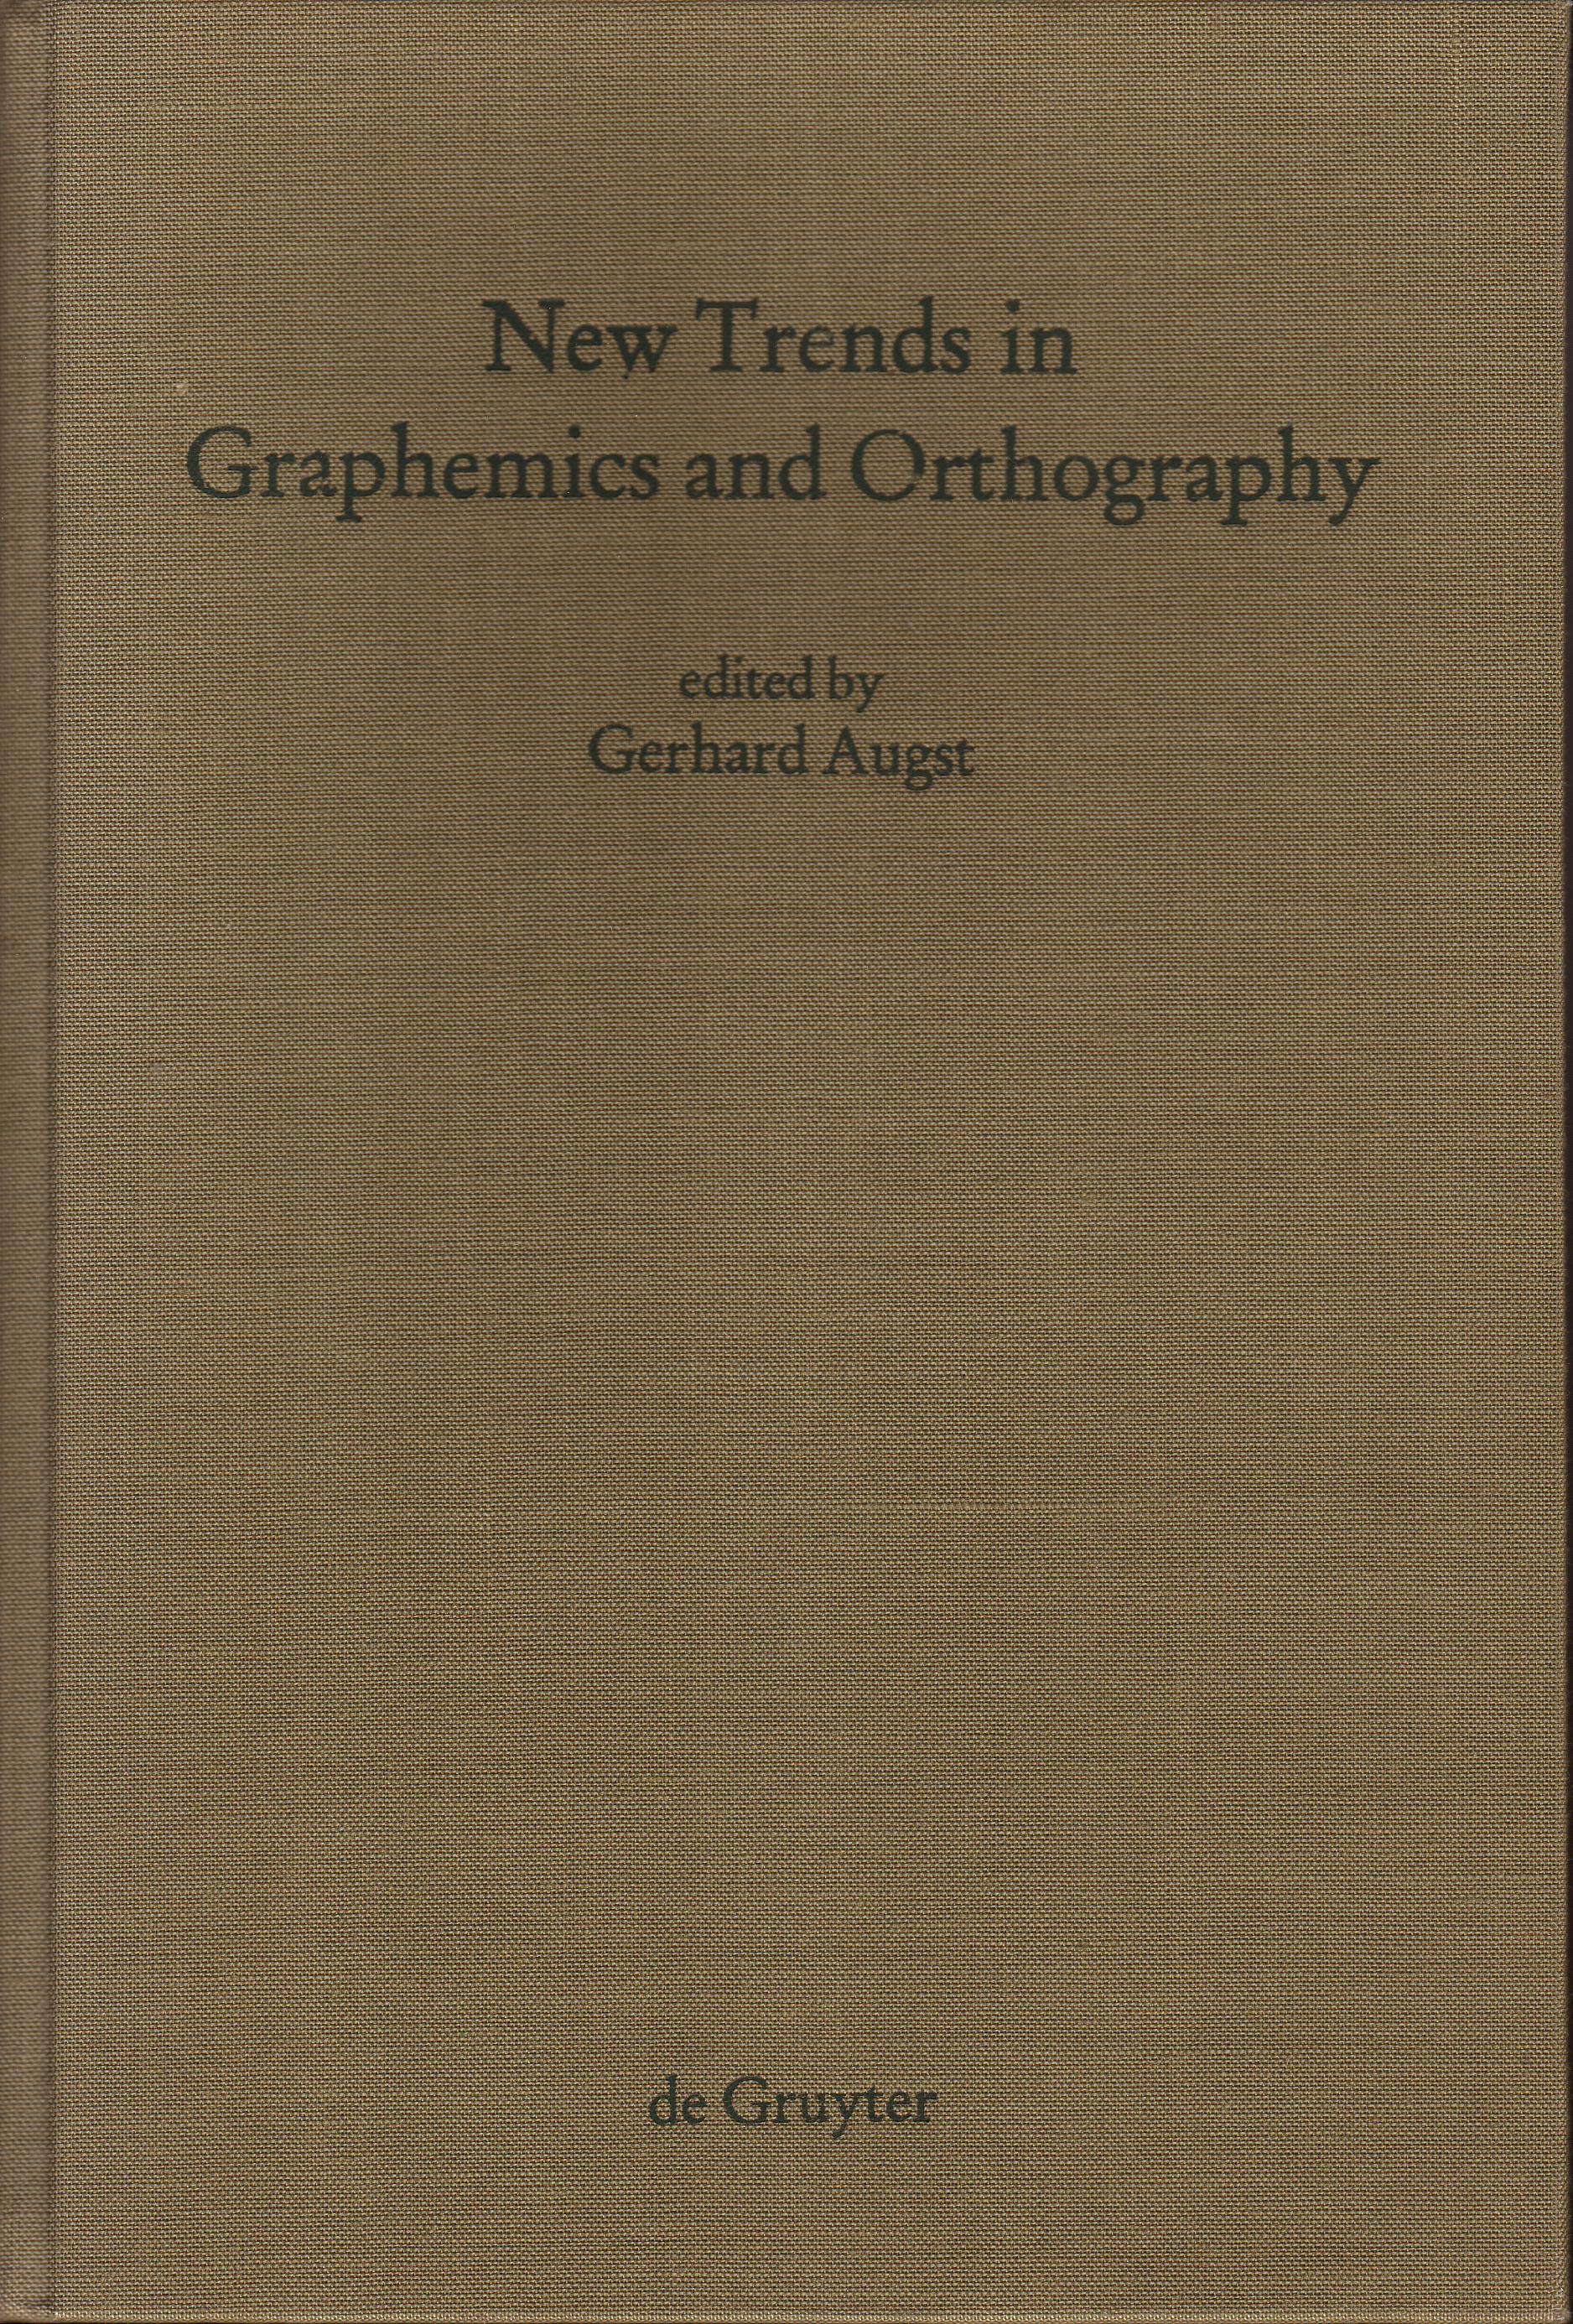 Graphemics and Orthography